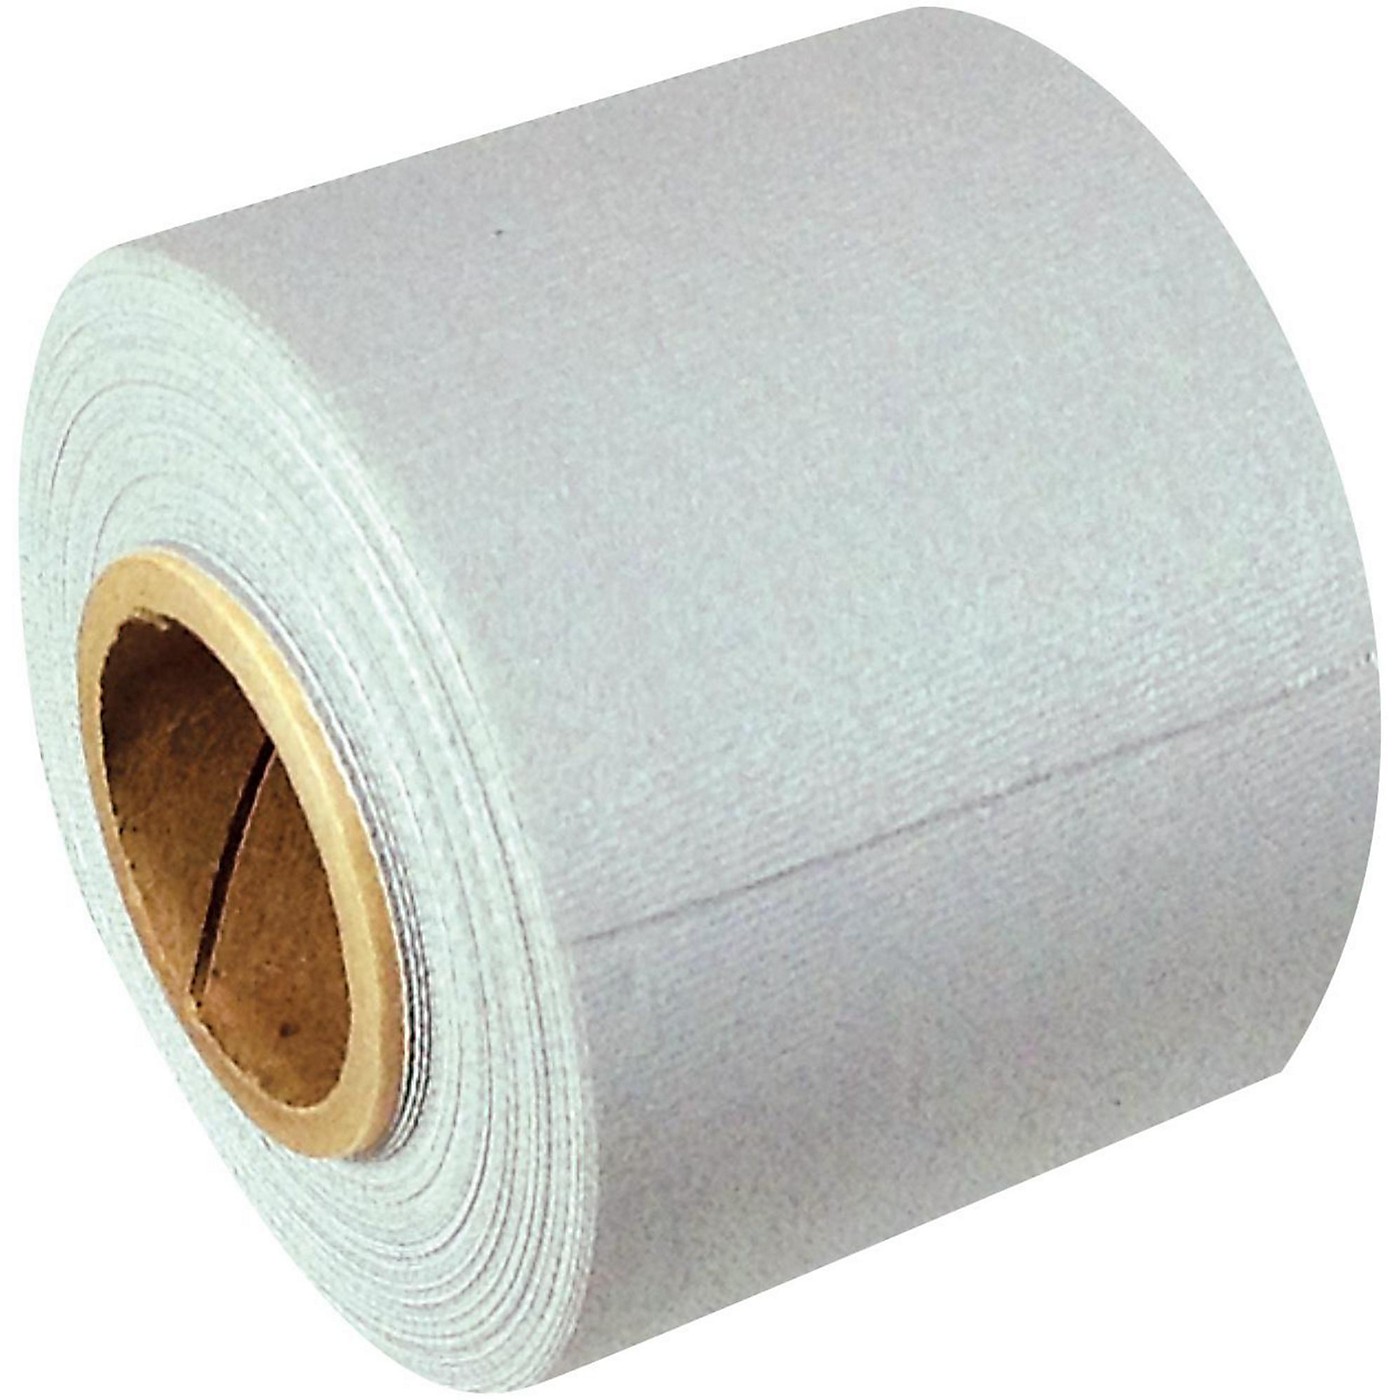 American Recorder Technologies Full Roll Gaffers Tape 2 In x 45 Yards Basic Colors thumbnail